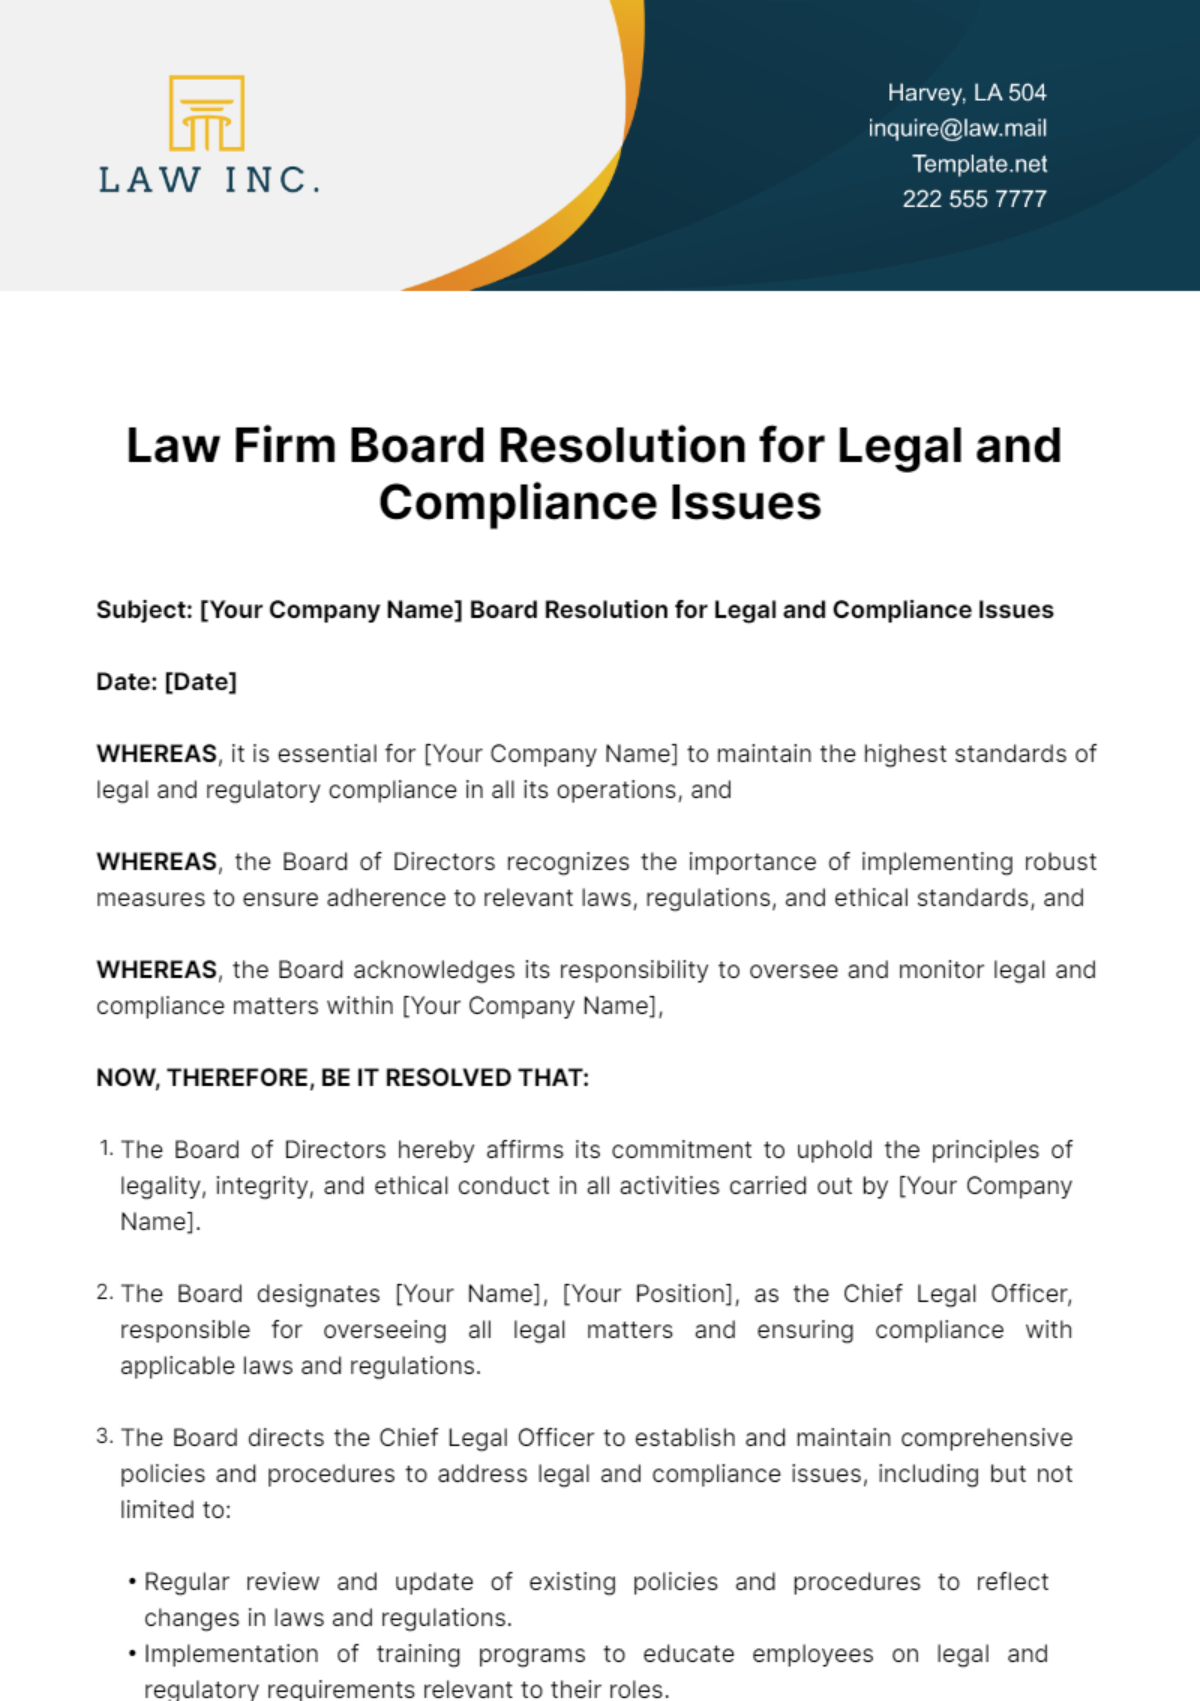 Free Law Firm Board Resolution for Legal and Compliance Issues Template